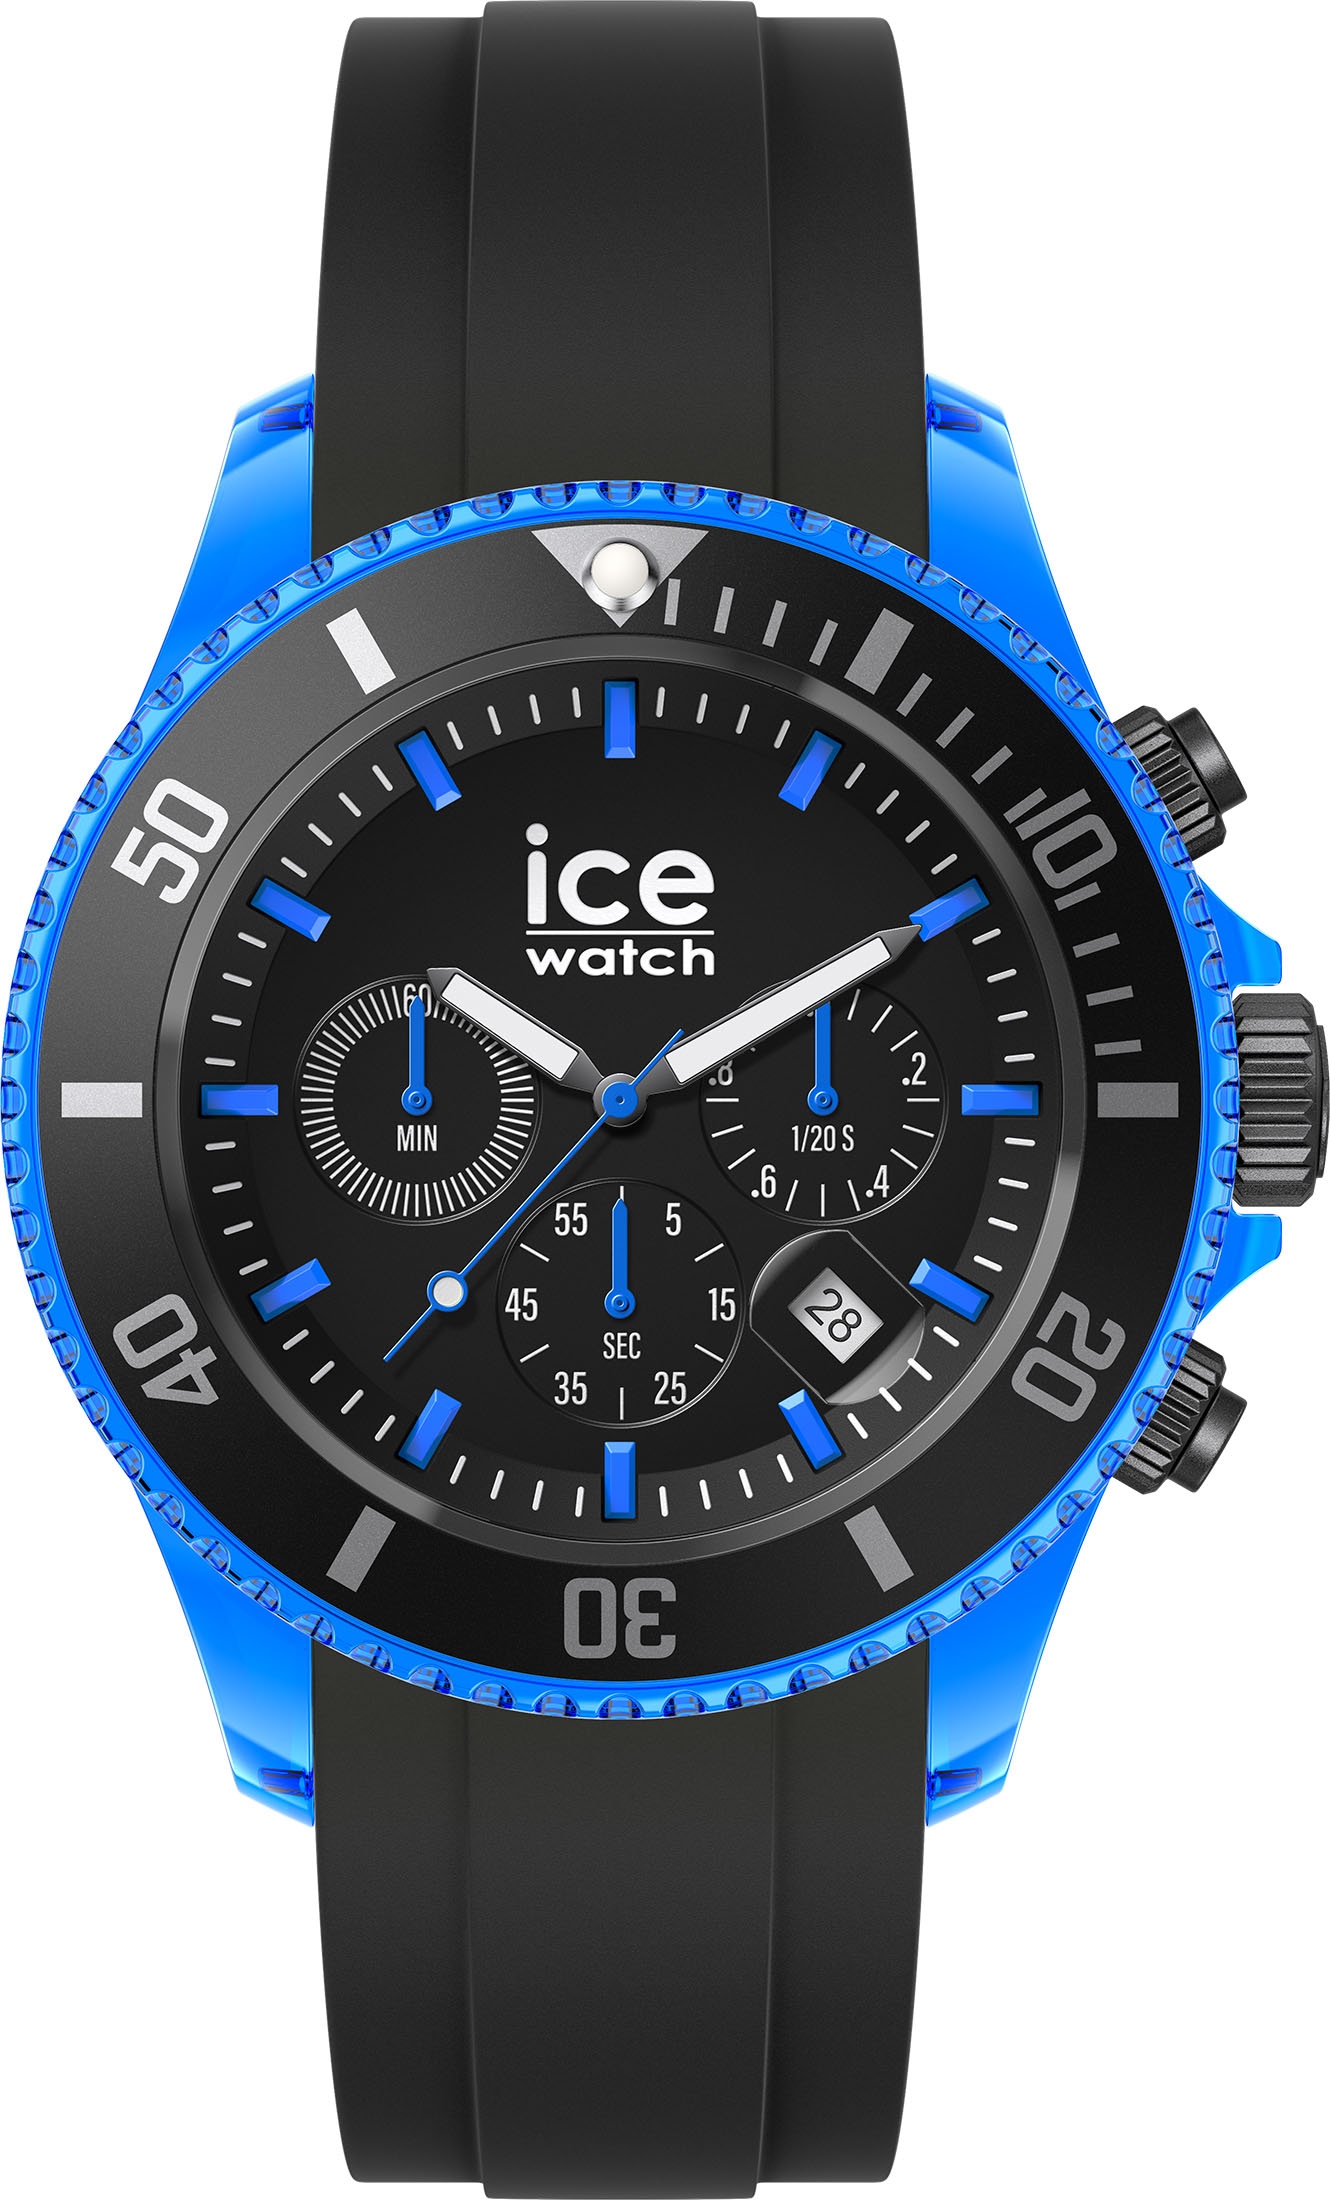 ice-watch Chronograph »ICE chrono online 019844« bei CH, Extra - shoppen - OTTO - Black large blue